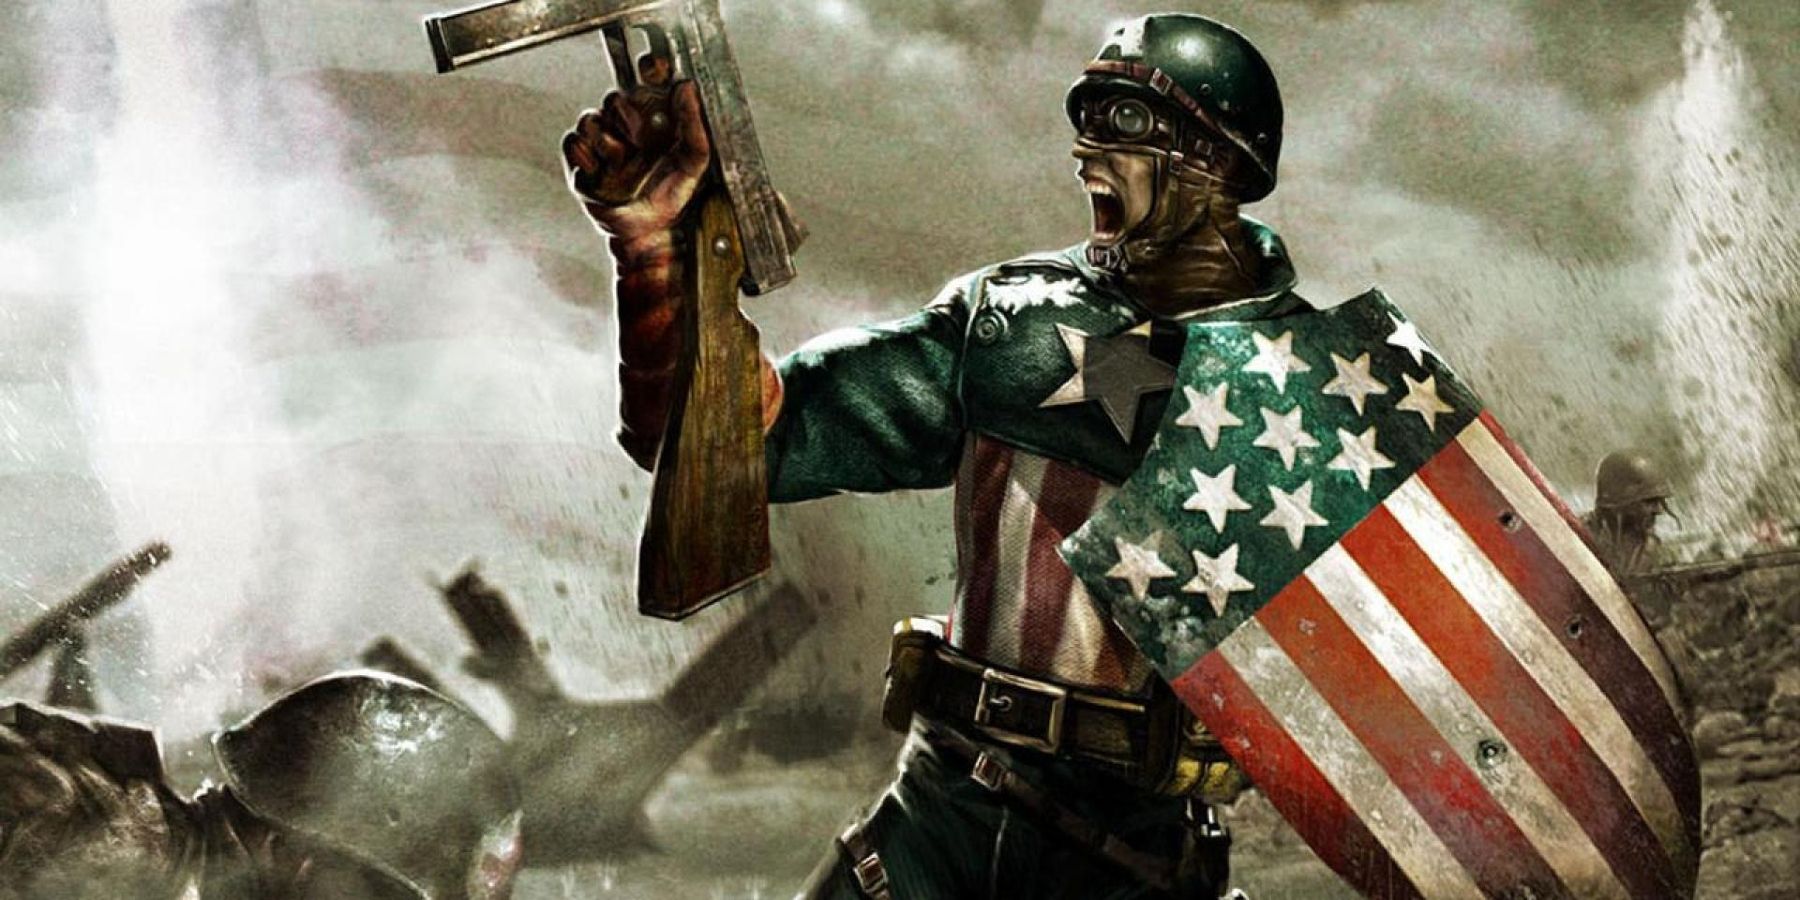 Captain America leading the charge during World War II in Ultimate Alliance loading screen